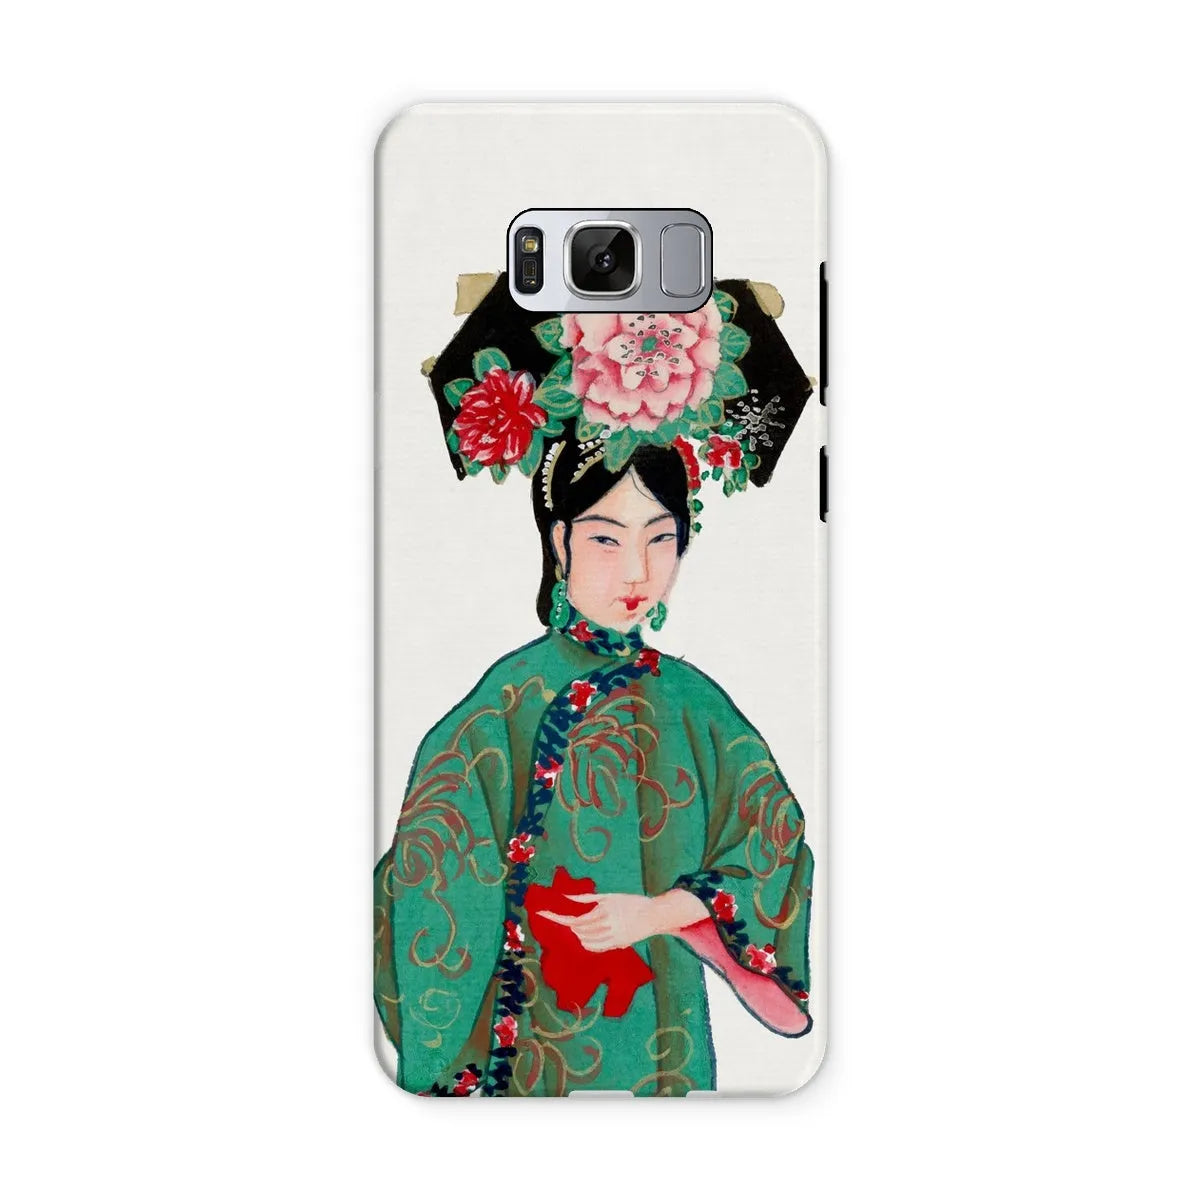 Chinese Noblewoman In Manchu Couture Art Phone Case - Samsung Galaxy S8 / Matte - Mobile Phone Cases - Aesthetic Art